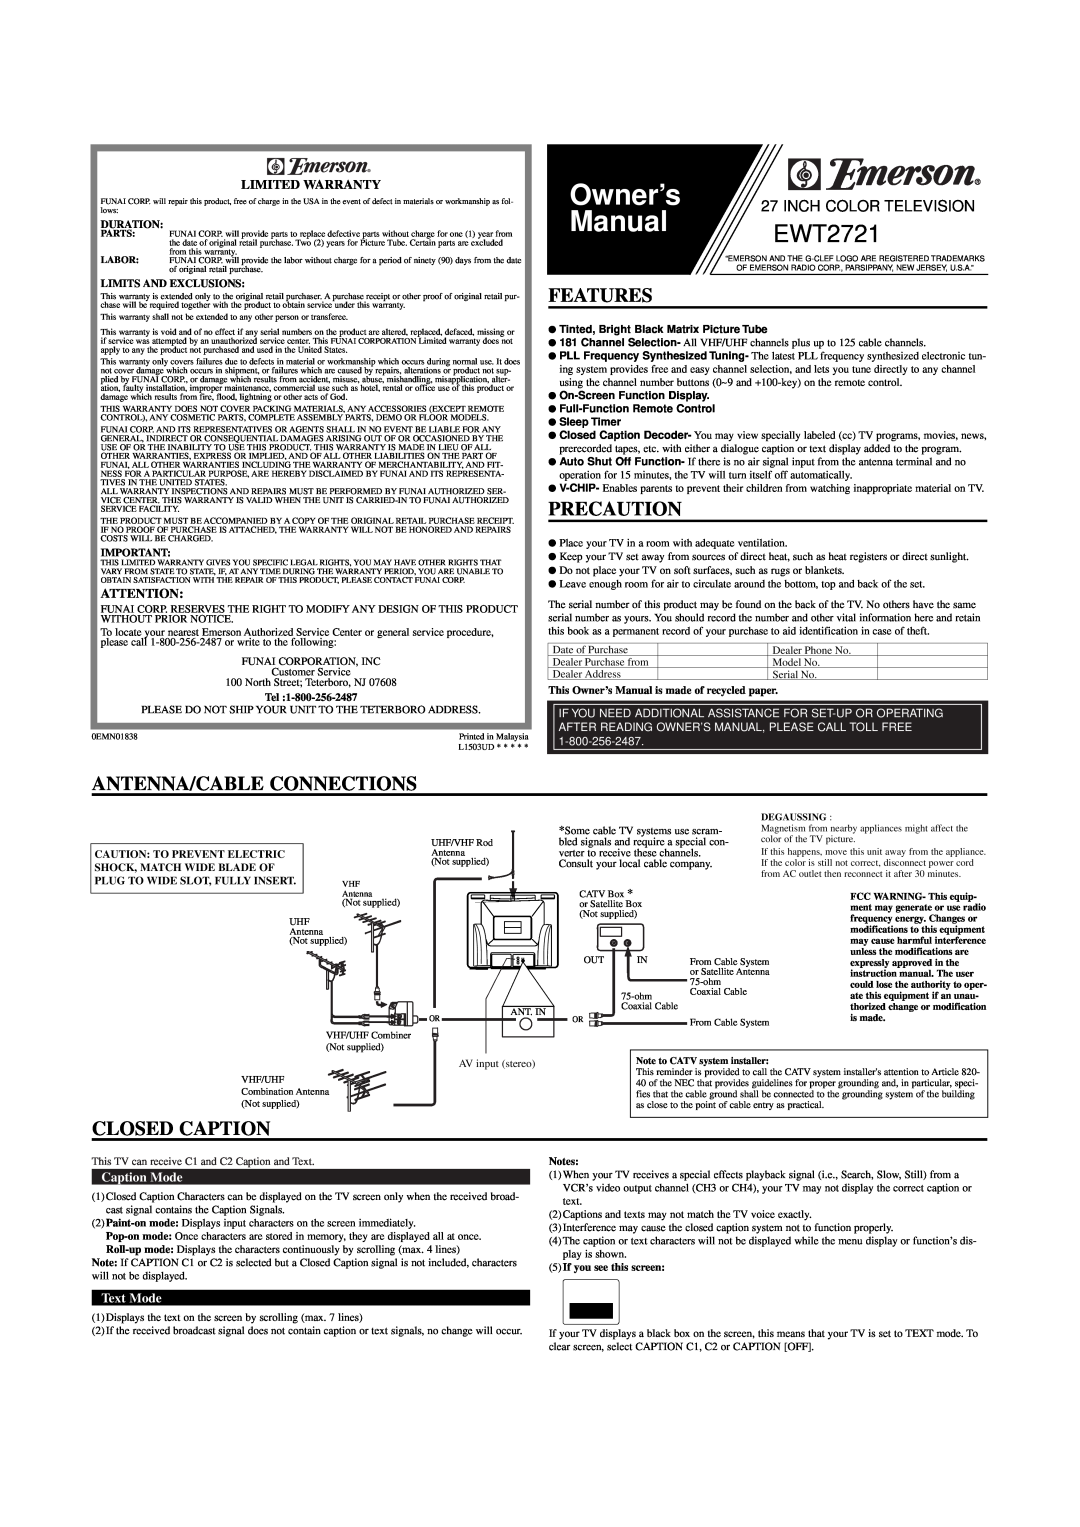 Emerson EWT2721 owner manual Features, Precaution, Antenna/Cable Connections, Closed Caption, Limited Warranty, Text Mode 